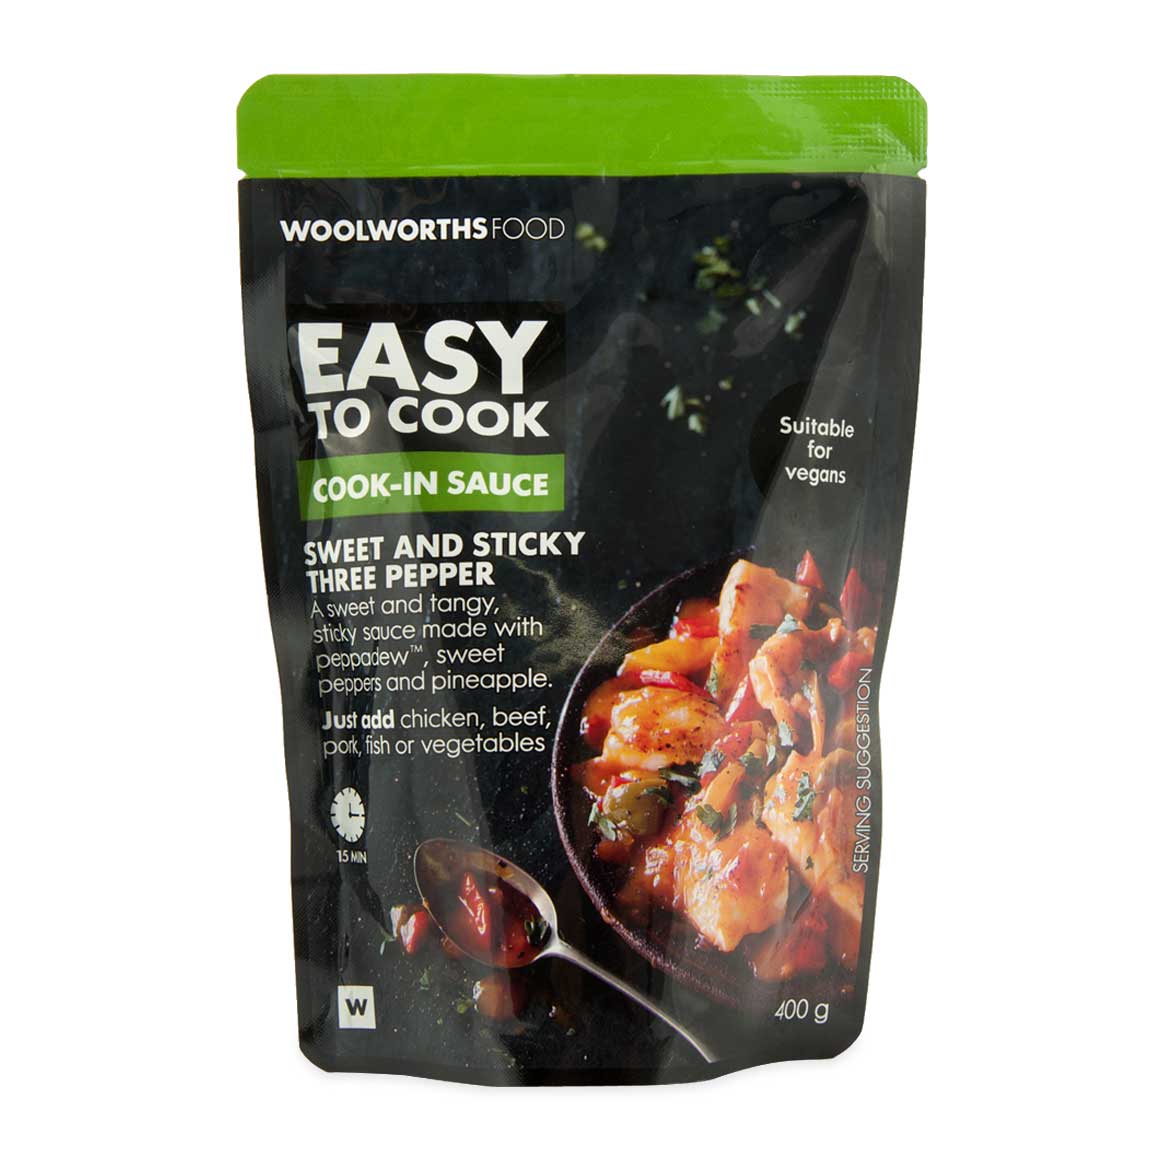 Sweet & Sticky Three Pepper Cook-in-Sauce 400g | Woolworths.co.za